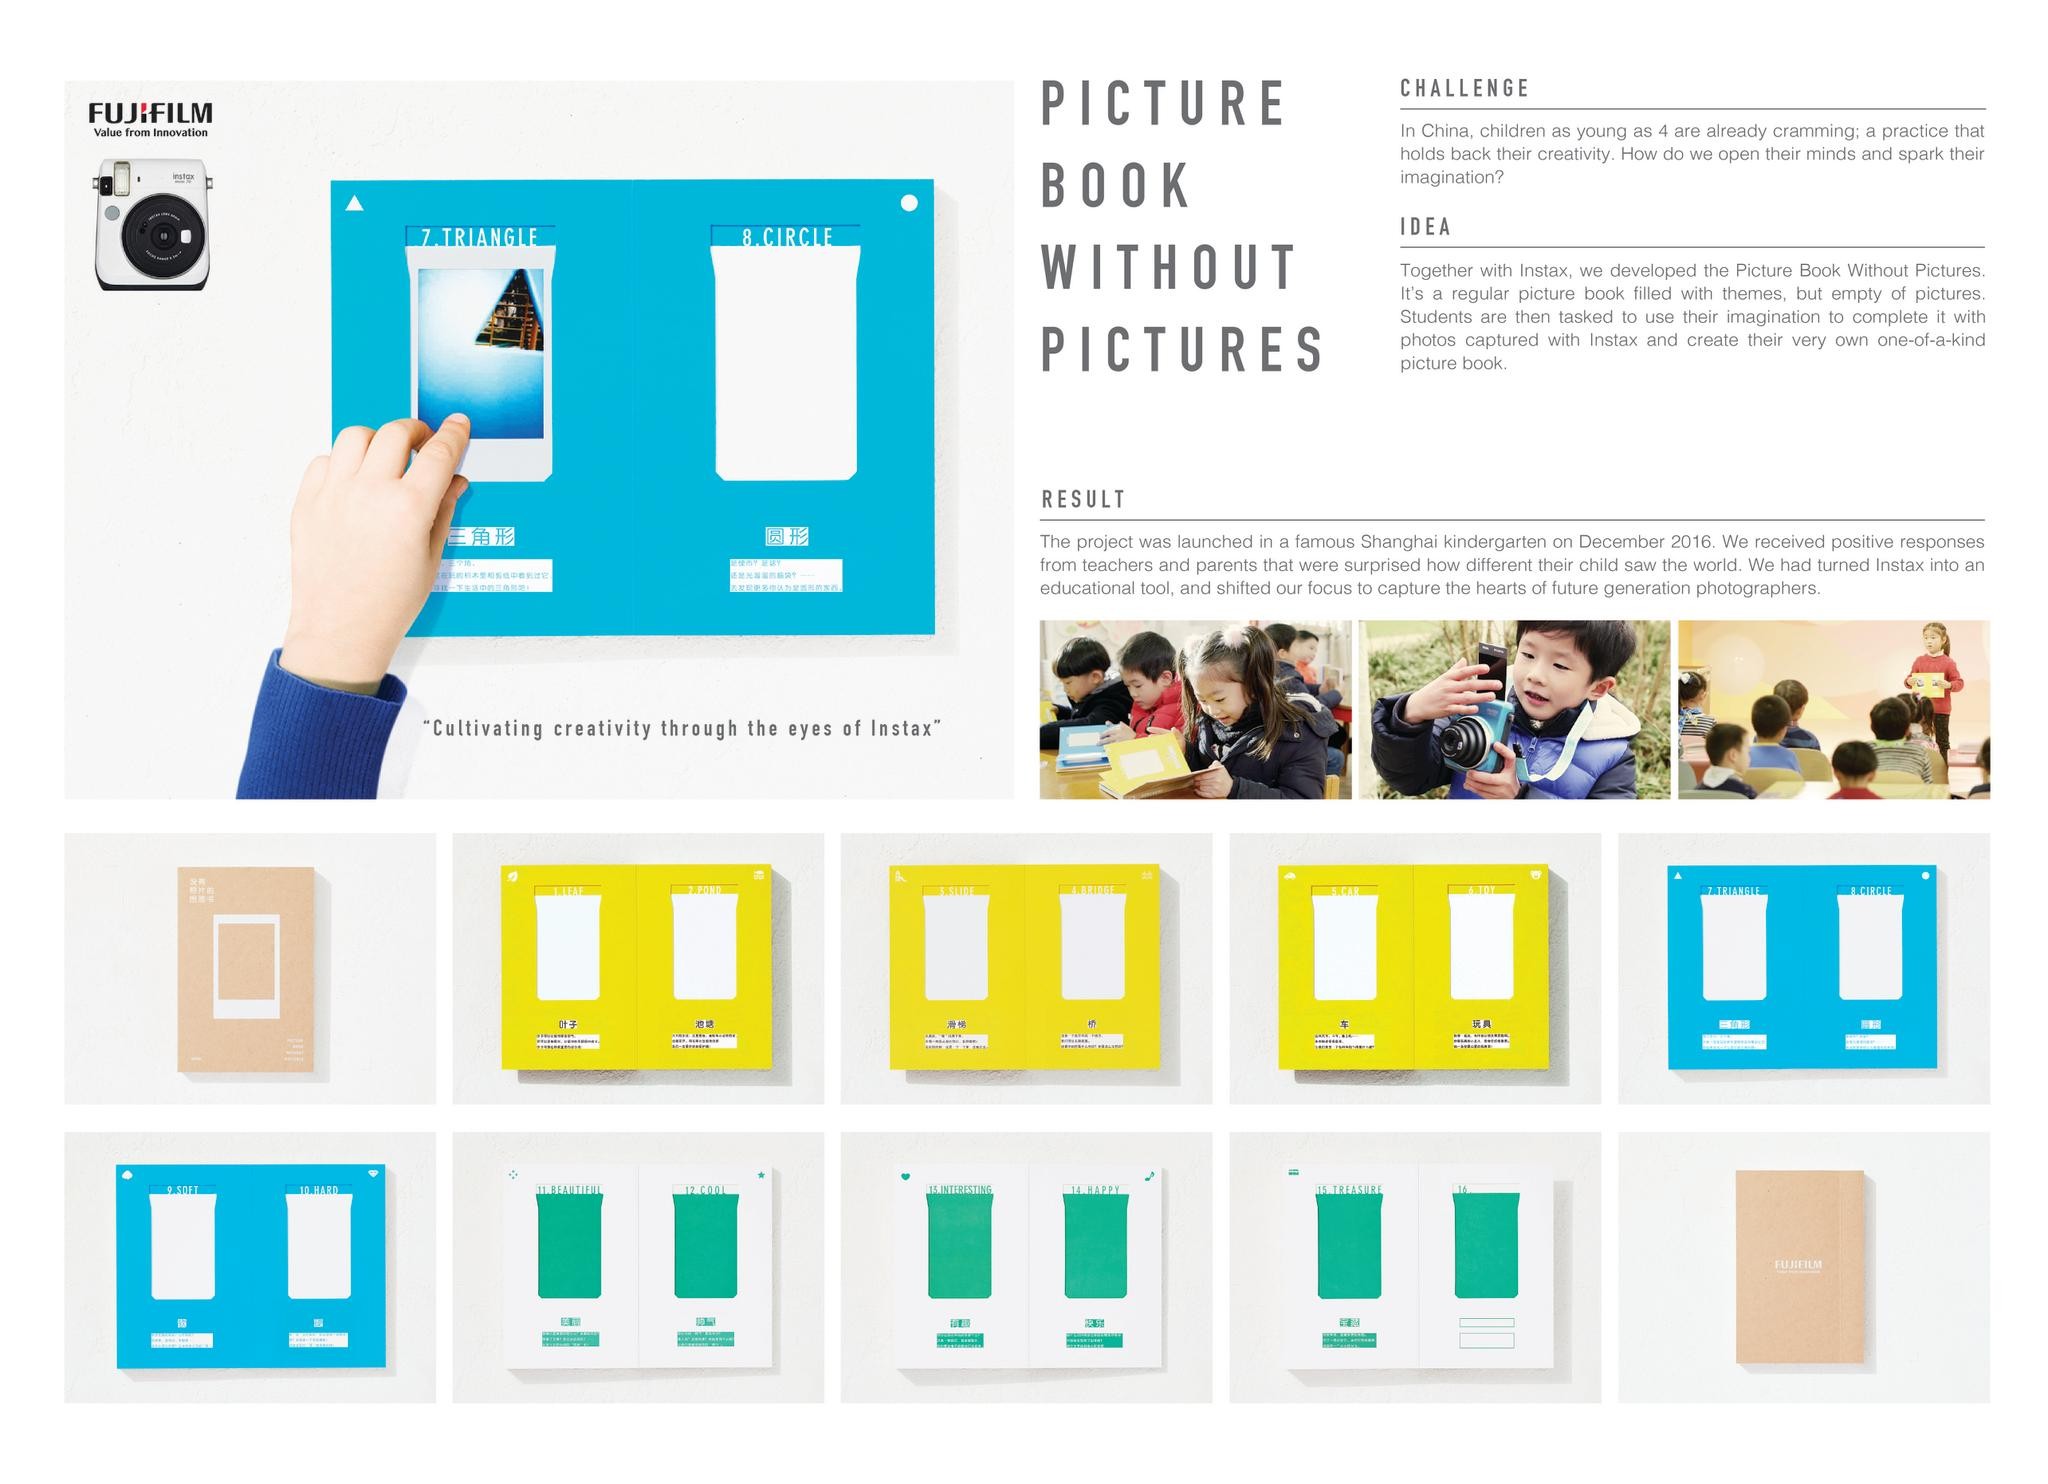 PICTURE BOOK WITHOUT PICTURES